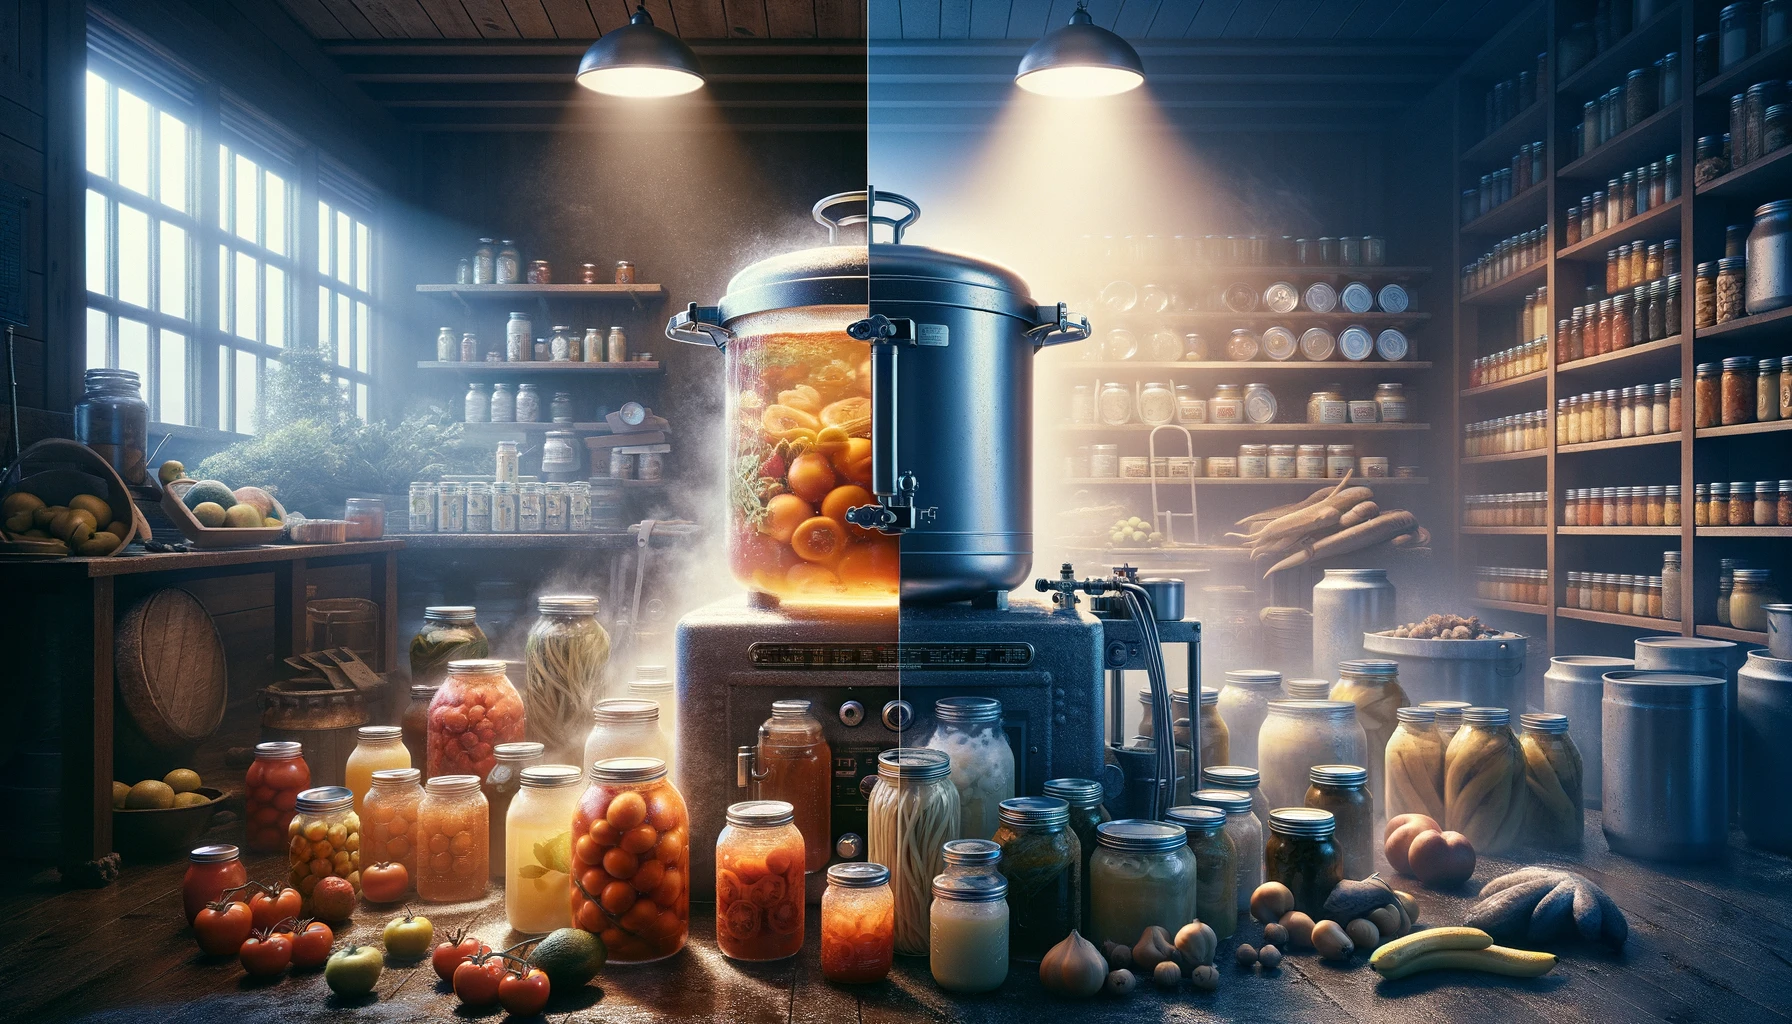 Engaging comparison between water bath canning and pressure canning for preppers, featuring jars in a boiling water bath on the left for high-acid foods and a robust pressure canner on the right for low-acid foods like meats and vegetables. The scene vividly illustrates the methods' differences and benefits, with shelves of preserved goods in the background, emphasizing the diversity and effectiveness of each canning technique